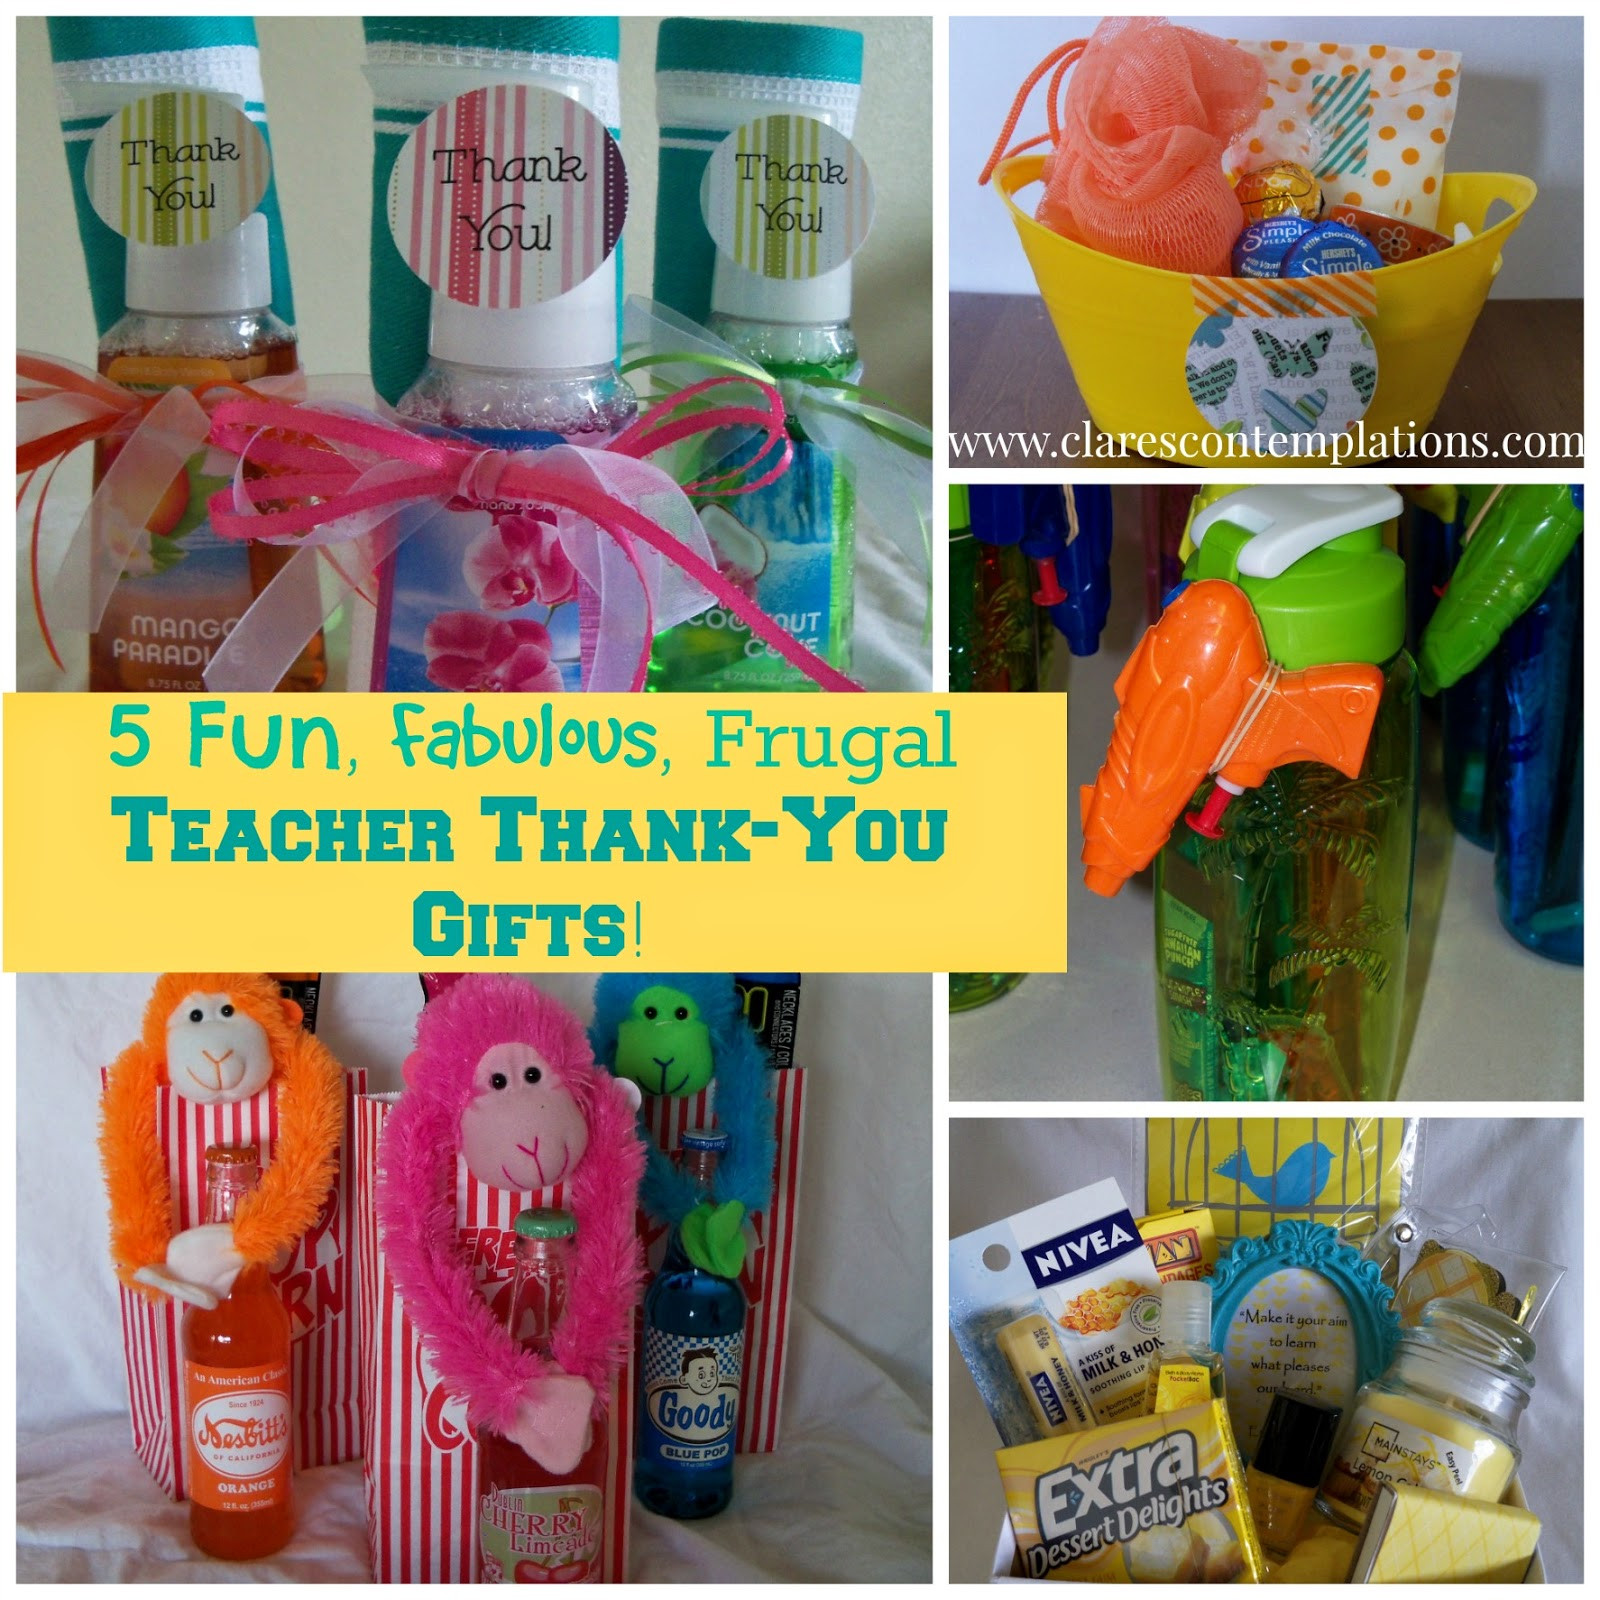 Teacher Thank You Gift Ideas
 Clare s Contemplations 5 Unique Thoughtful and Frugal